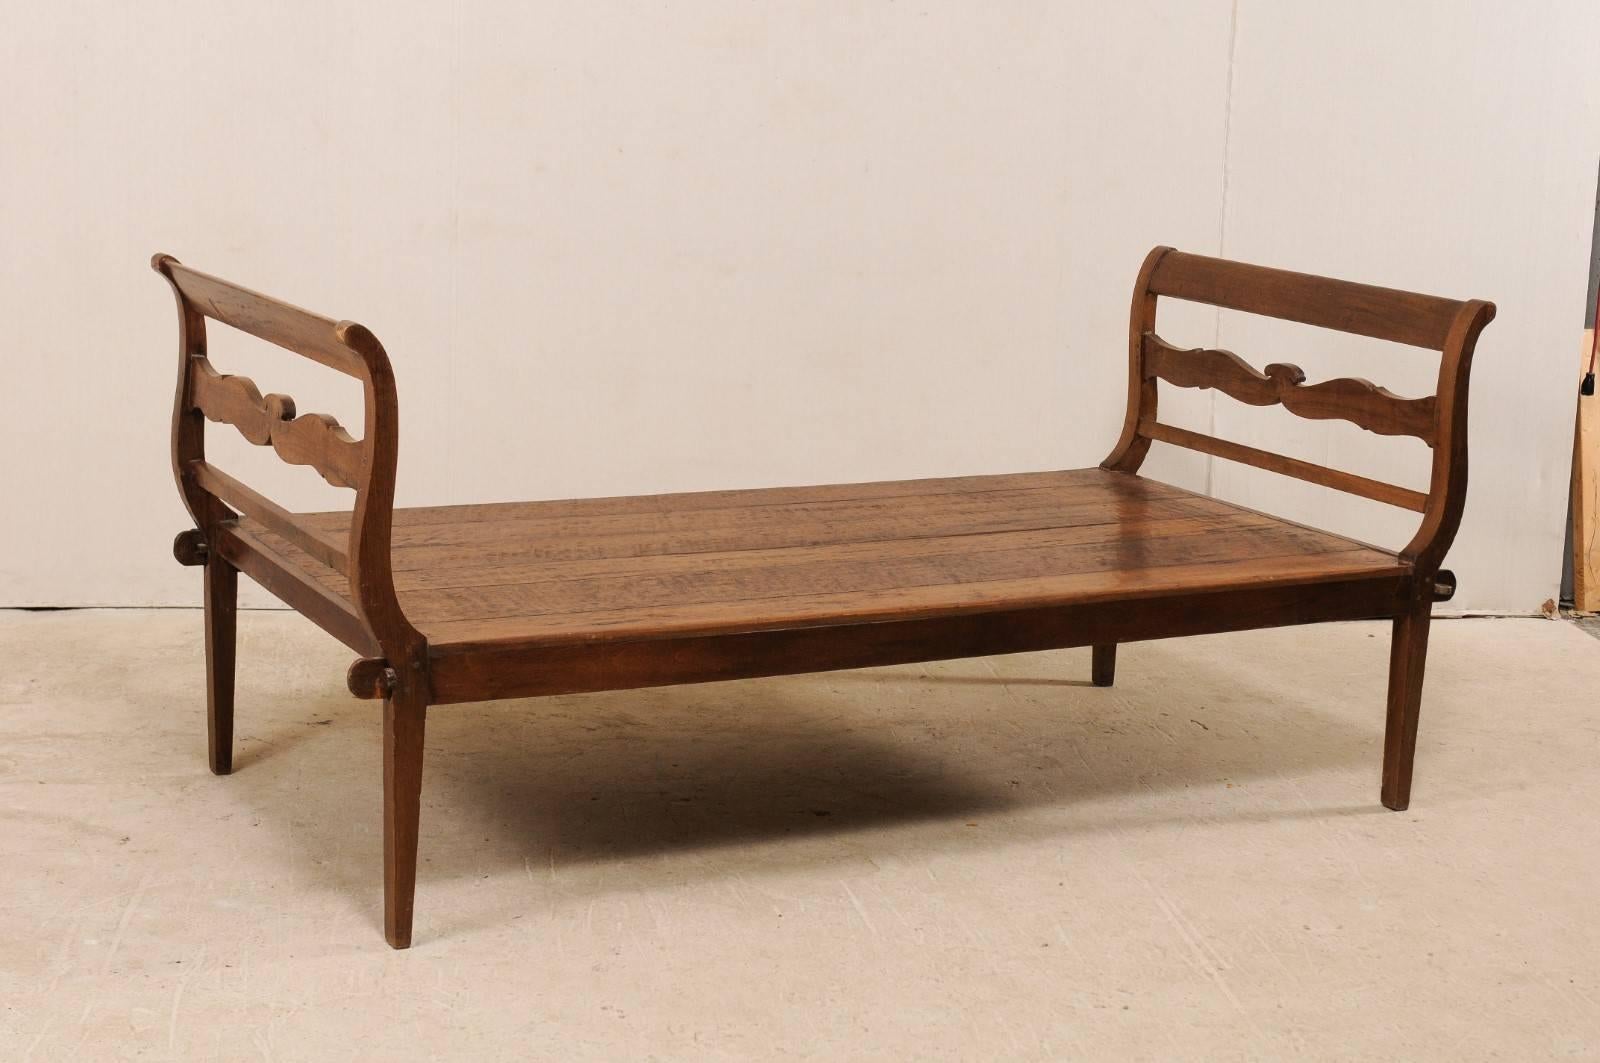 A Brazilian 19th century peroba wood daybed. This nicely-sized antique daybed from Brazil features curvy slatted head and foot boards, with a beautifully carved center slat. The peroba wood, which is a tropical native hardwood to Brazil that is 35%